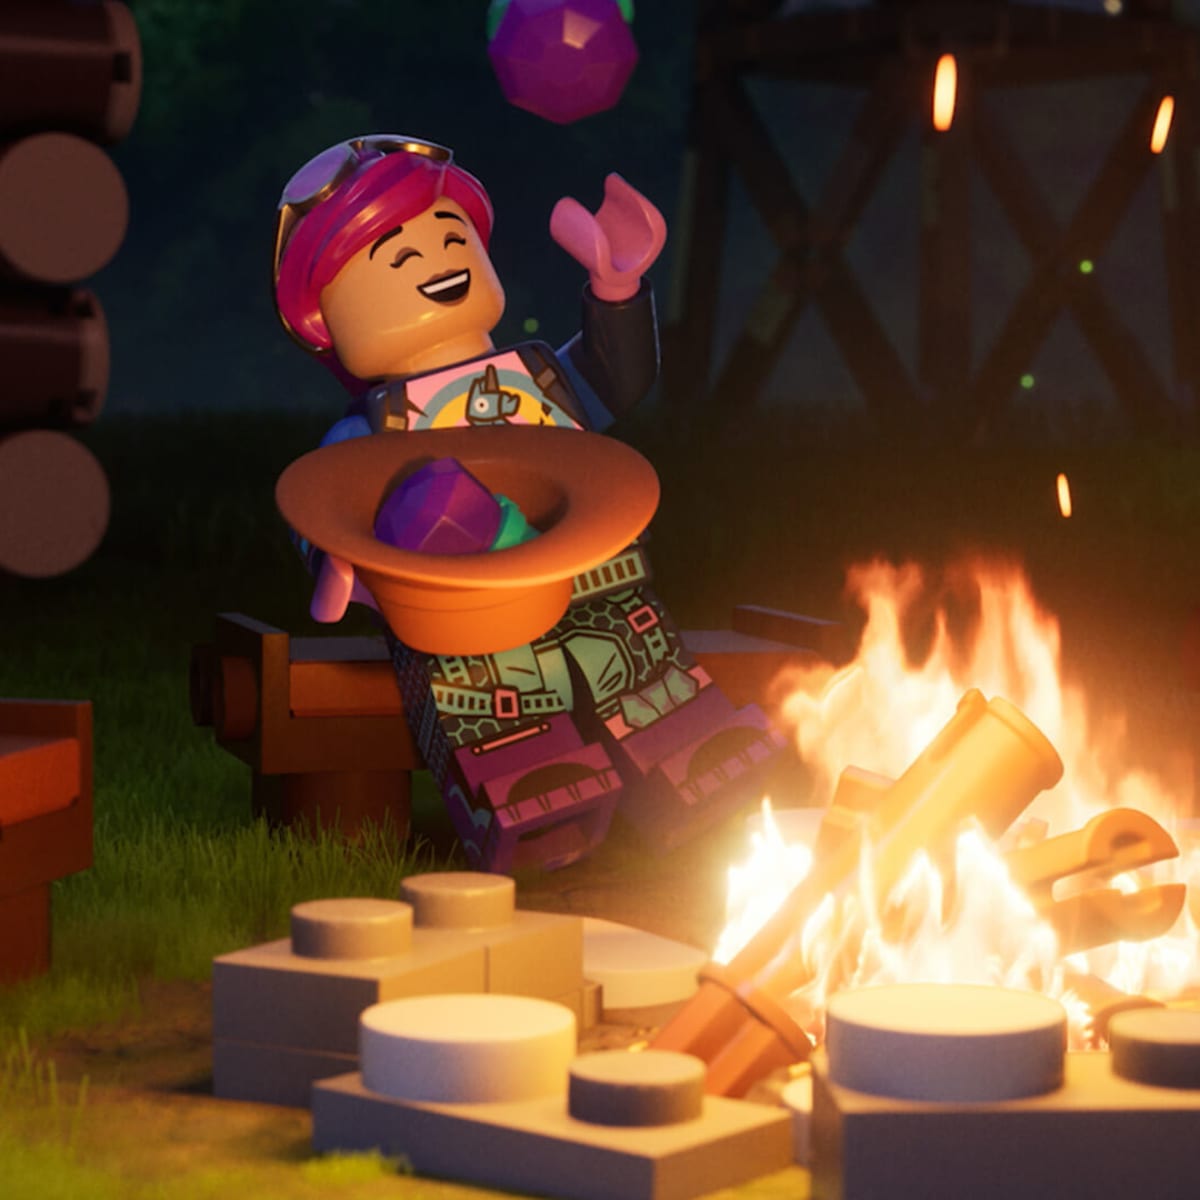 LEGO Fortnite teased in potential collaboration between LEGO